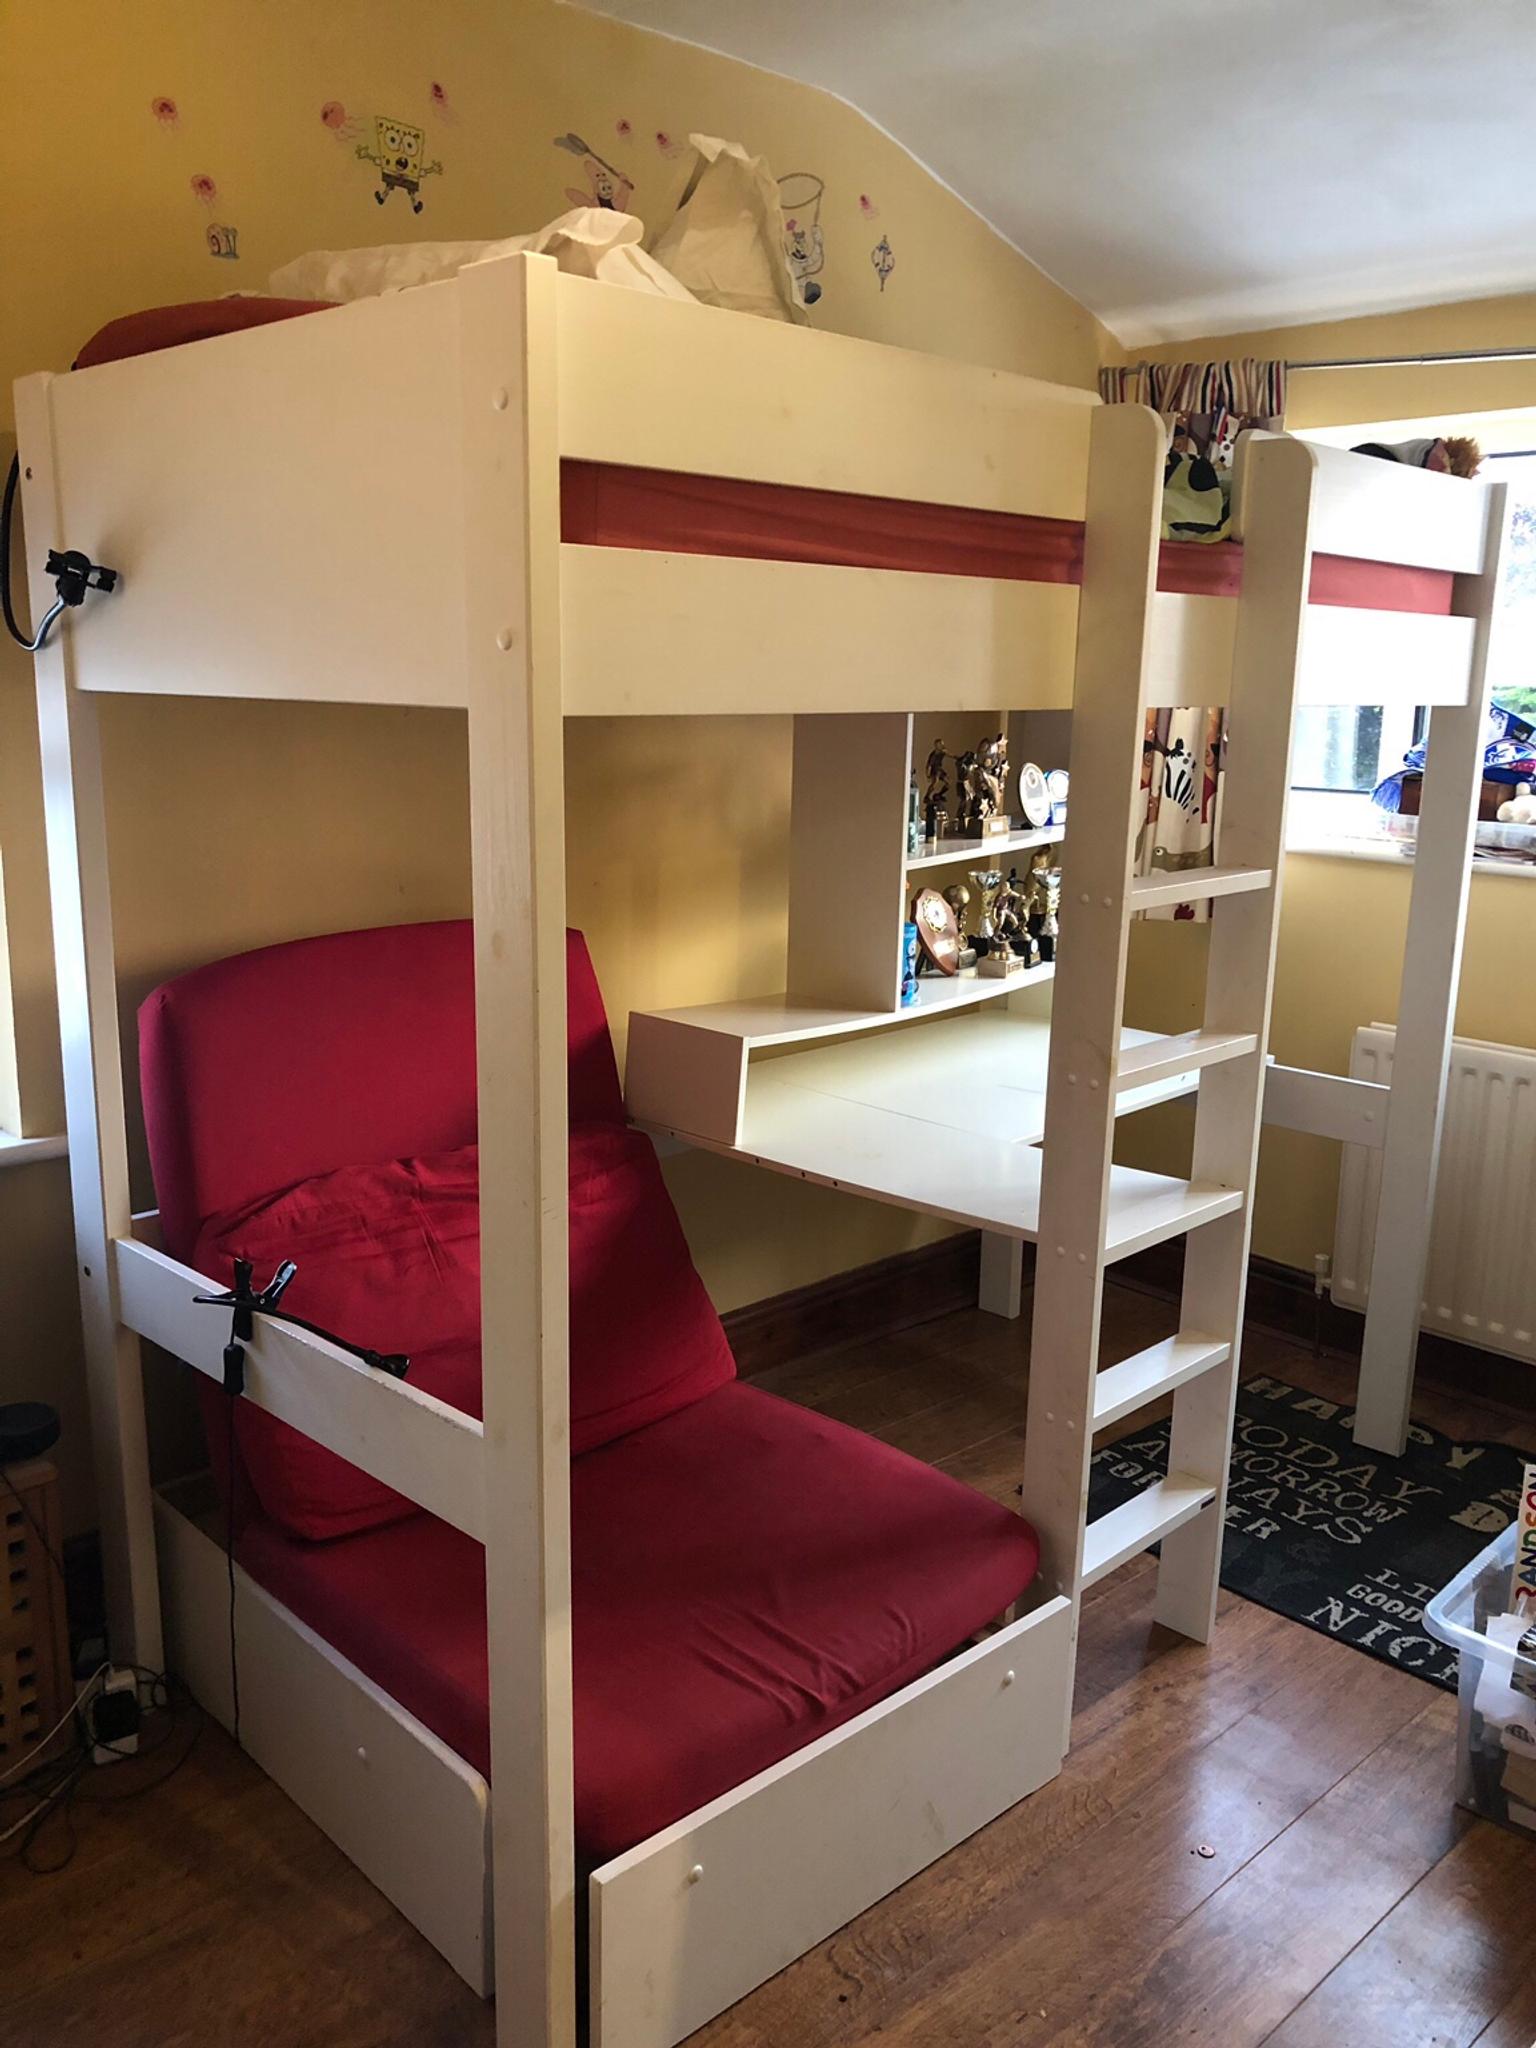 Stompa High Sleeper Bed With Pull Out Futon In Ch48 Wirral Fur